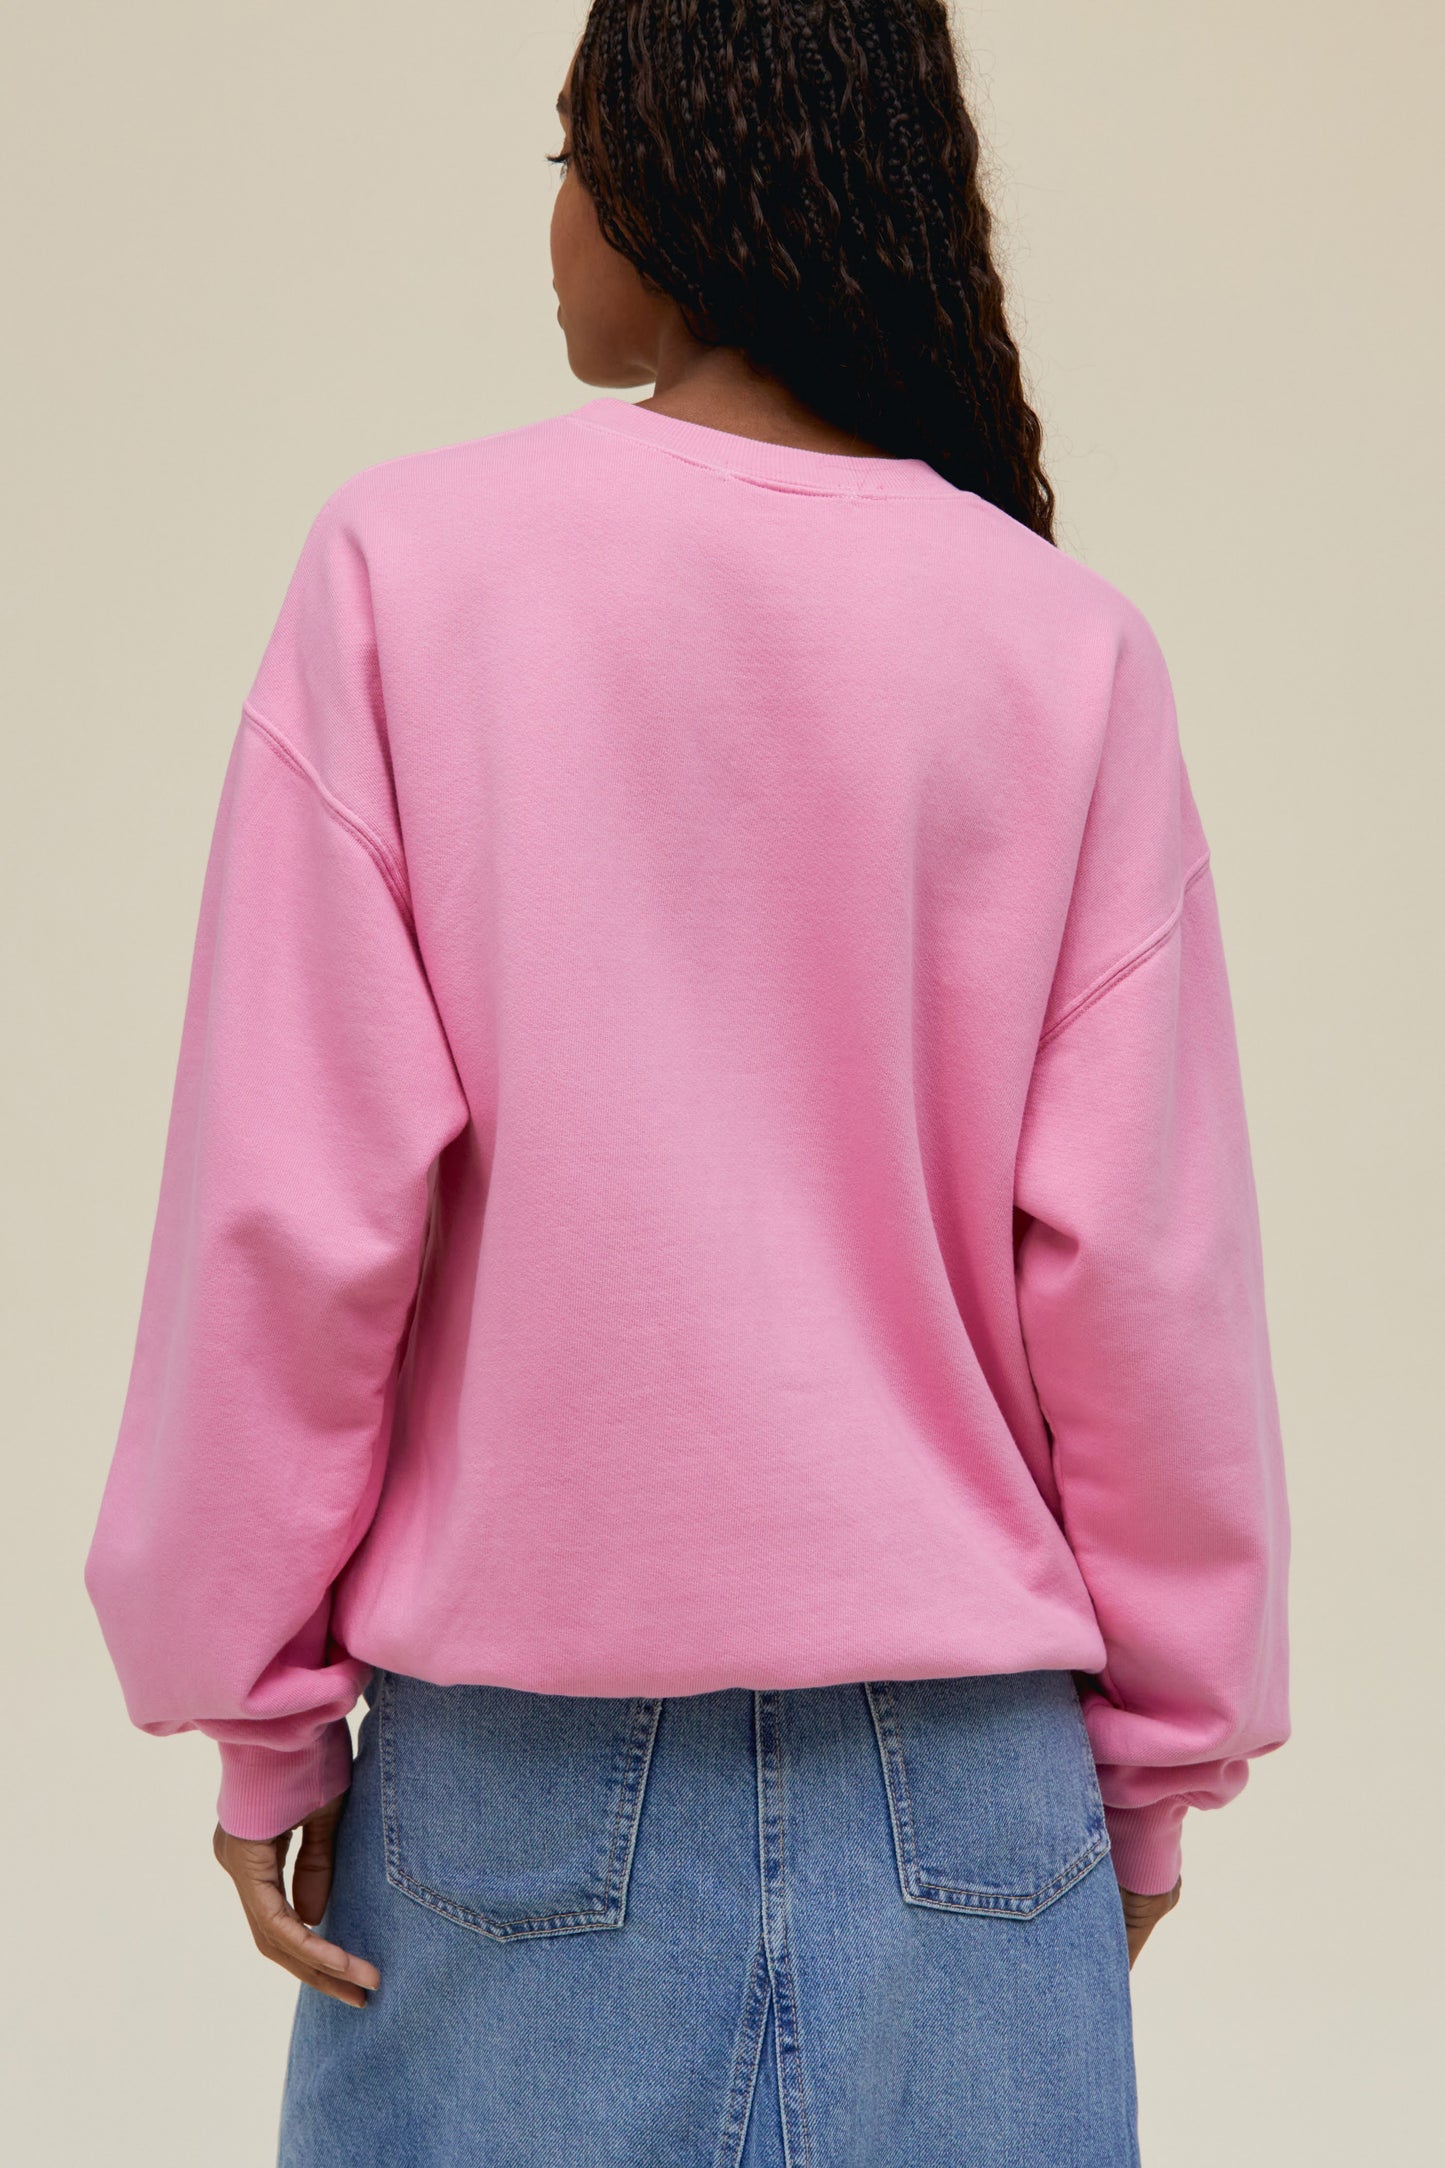 A dark-haired model featuring a pink sweatshirt with a large "THE DOORS" font on top and an exclusive rendition of The Door's Full Circle Album Art 